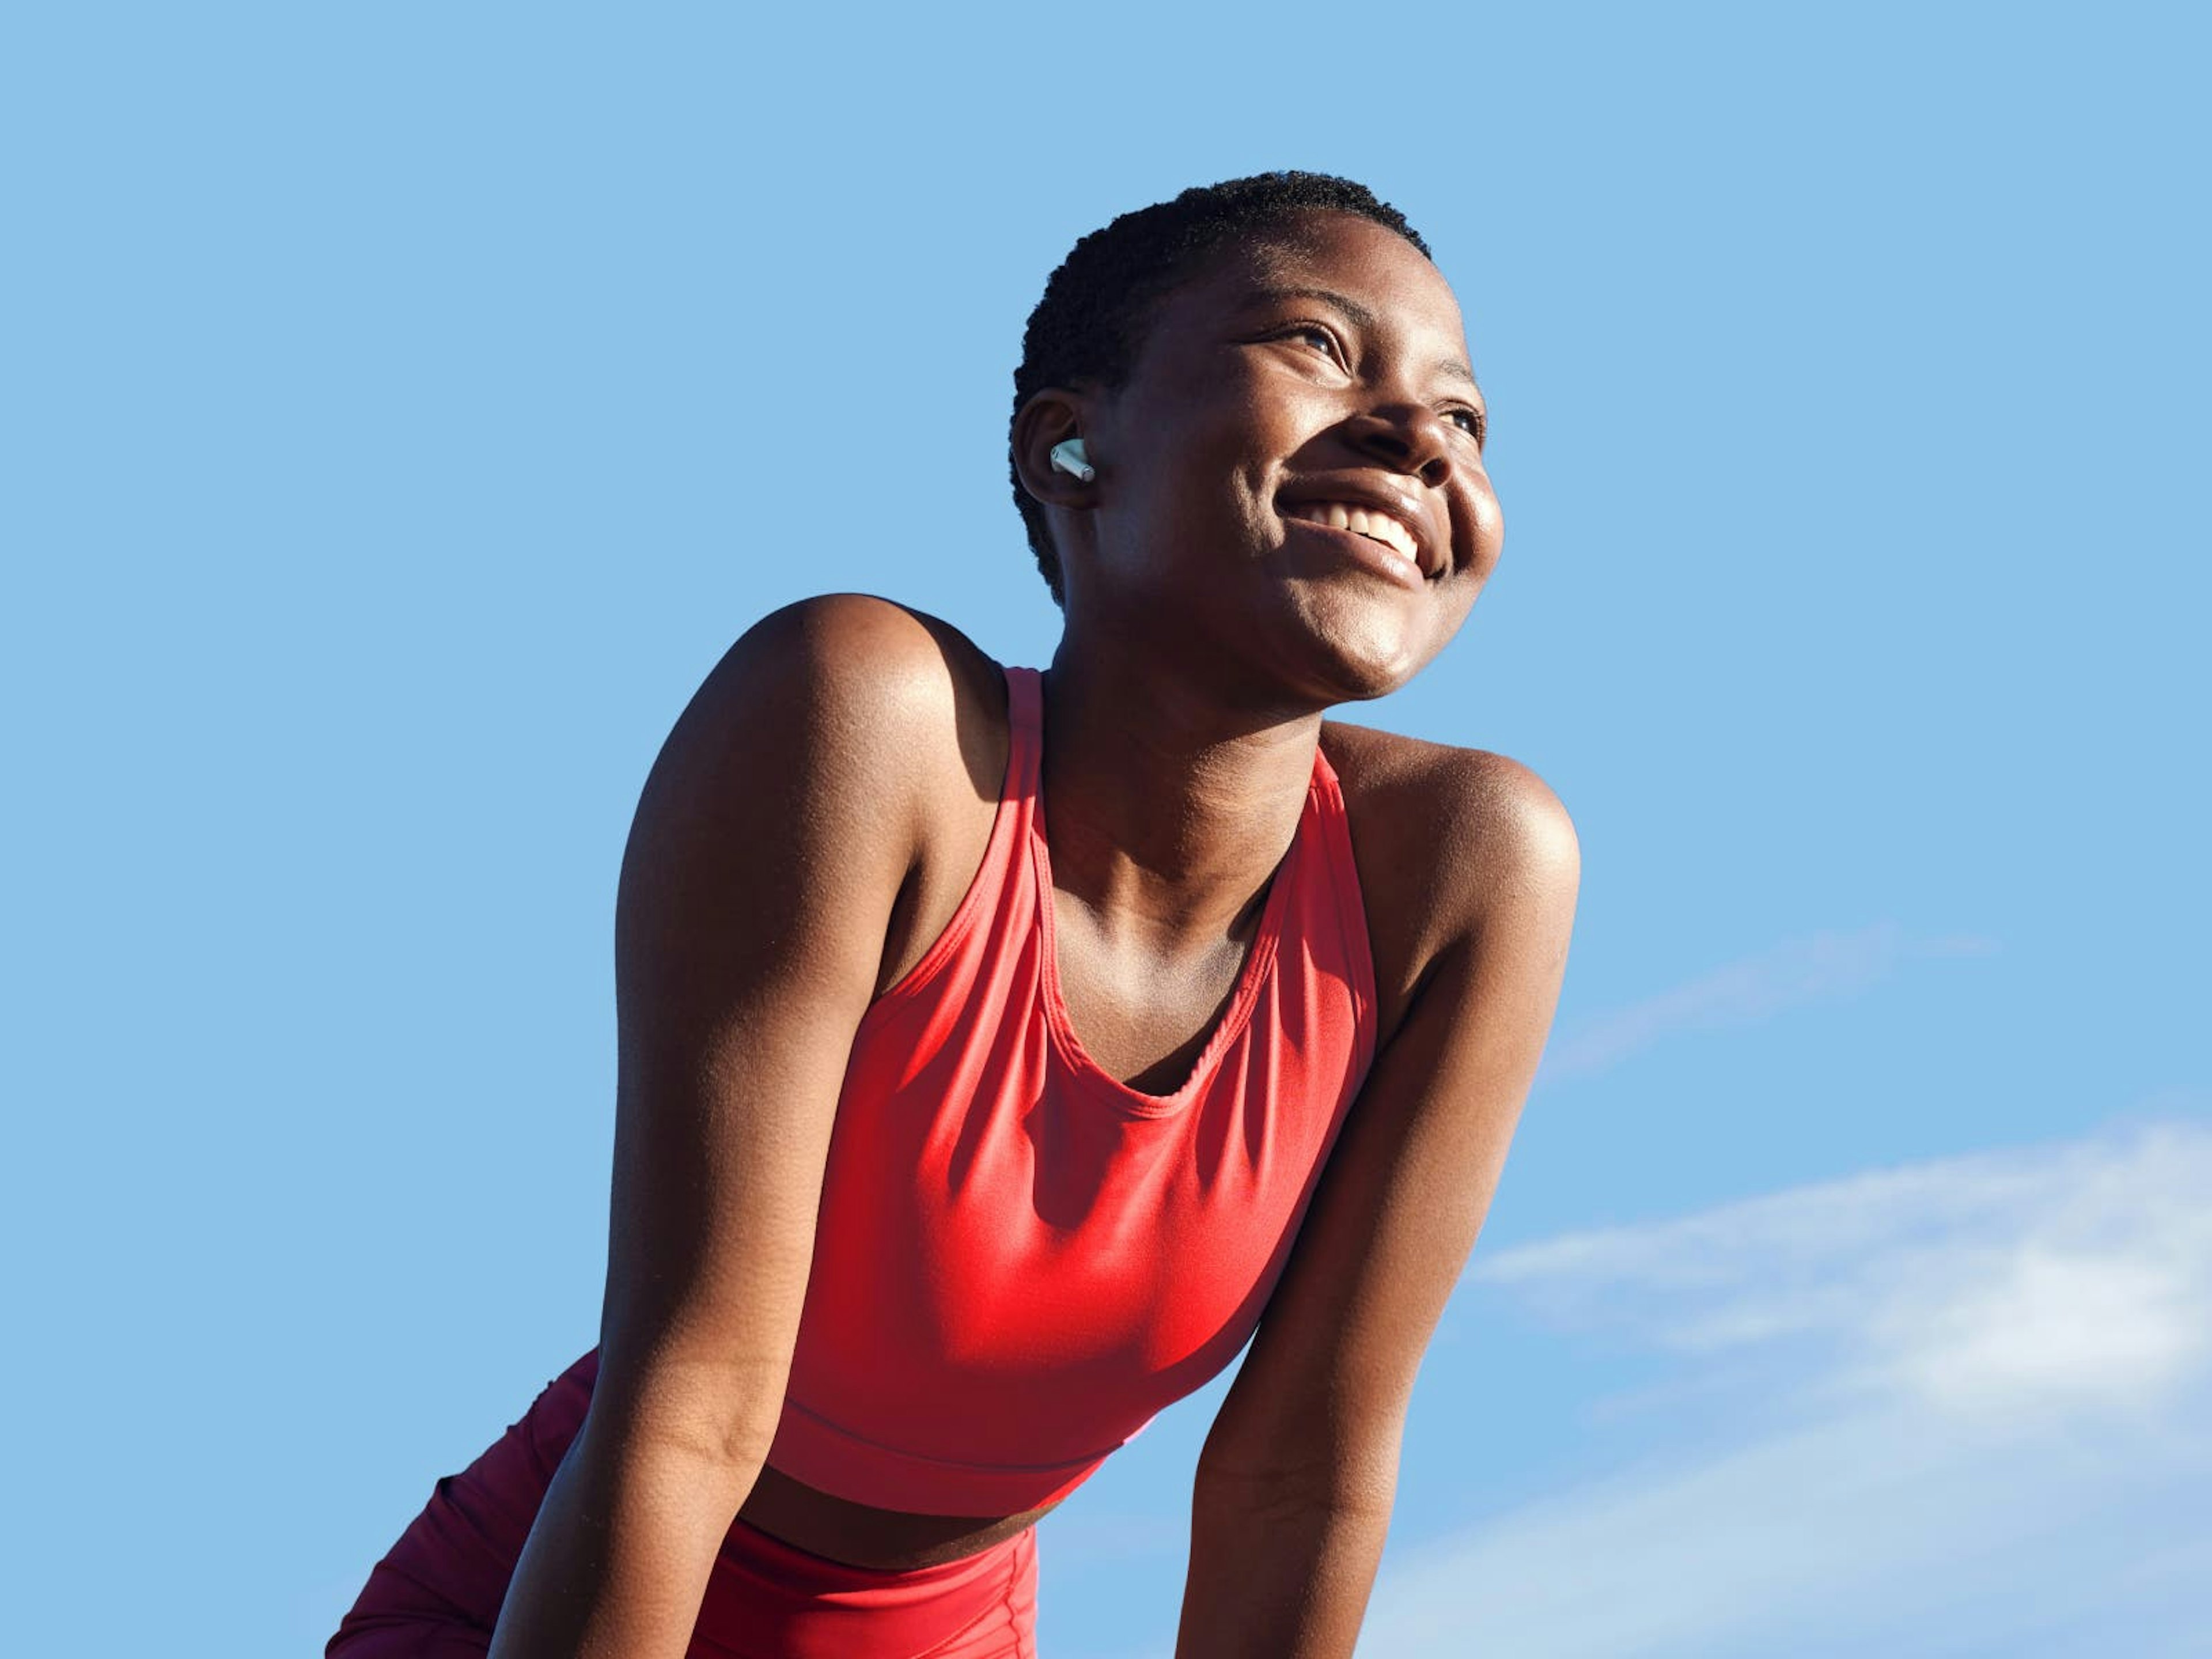 woman standing in red workout outfit smiling